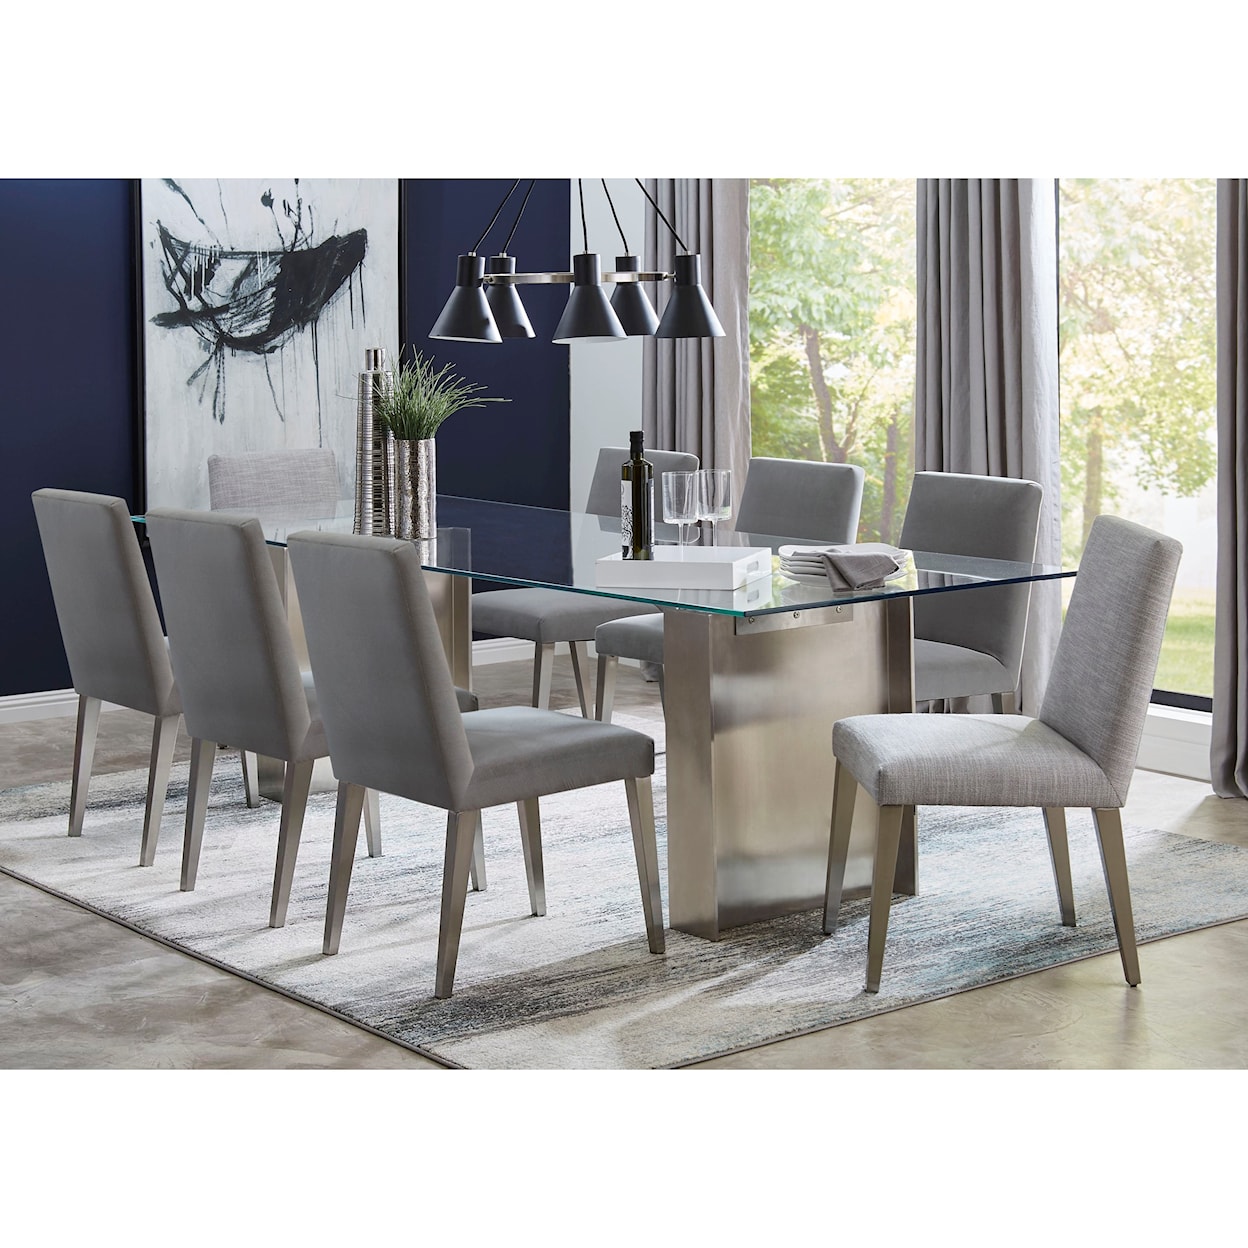 Modus International Omnia 104" Table in Brushed Stainless Steel